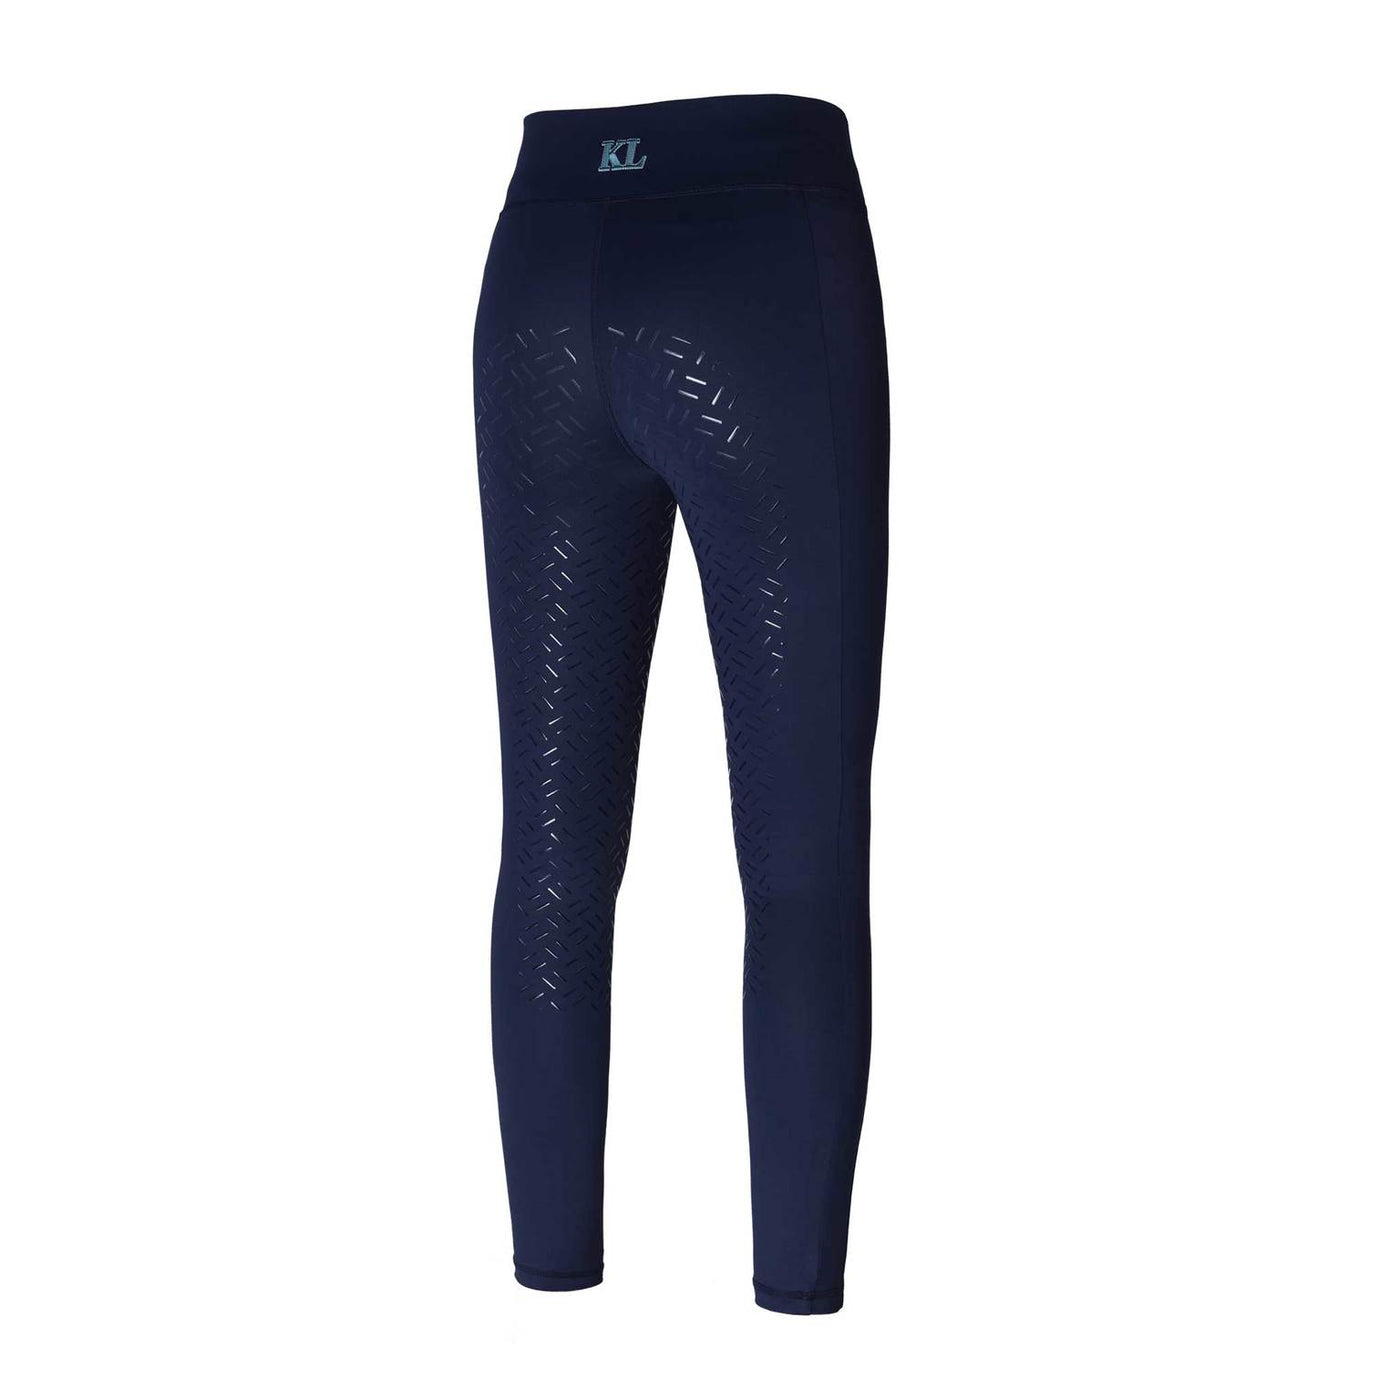 KLkarina Ladies Pull-On Breeches - OUTLET